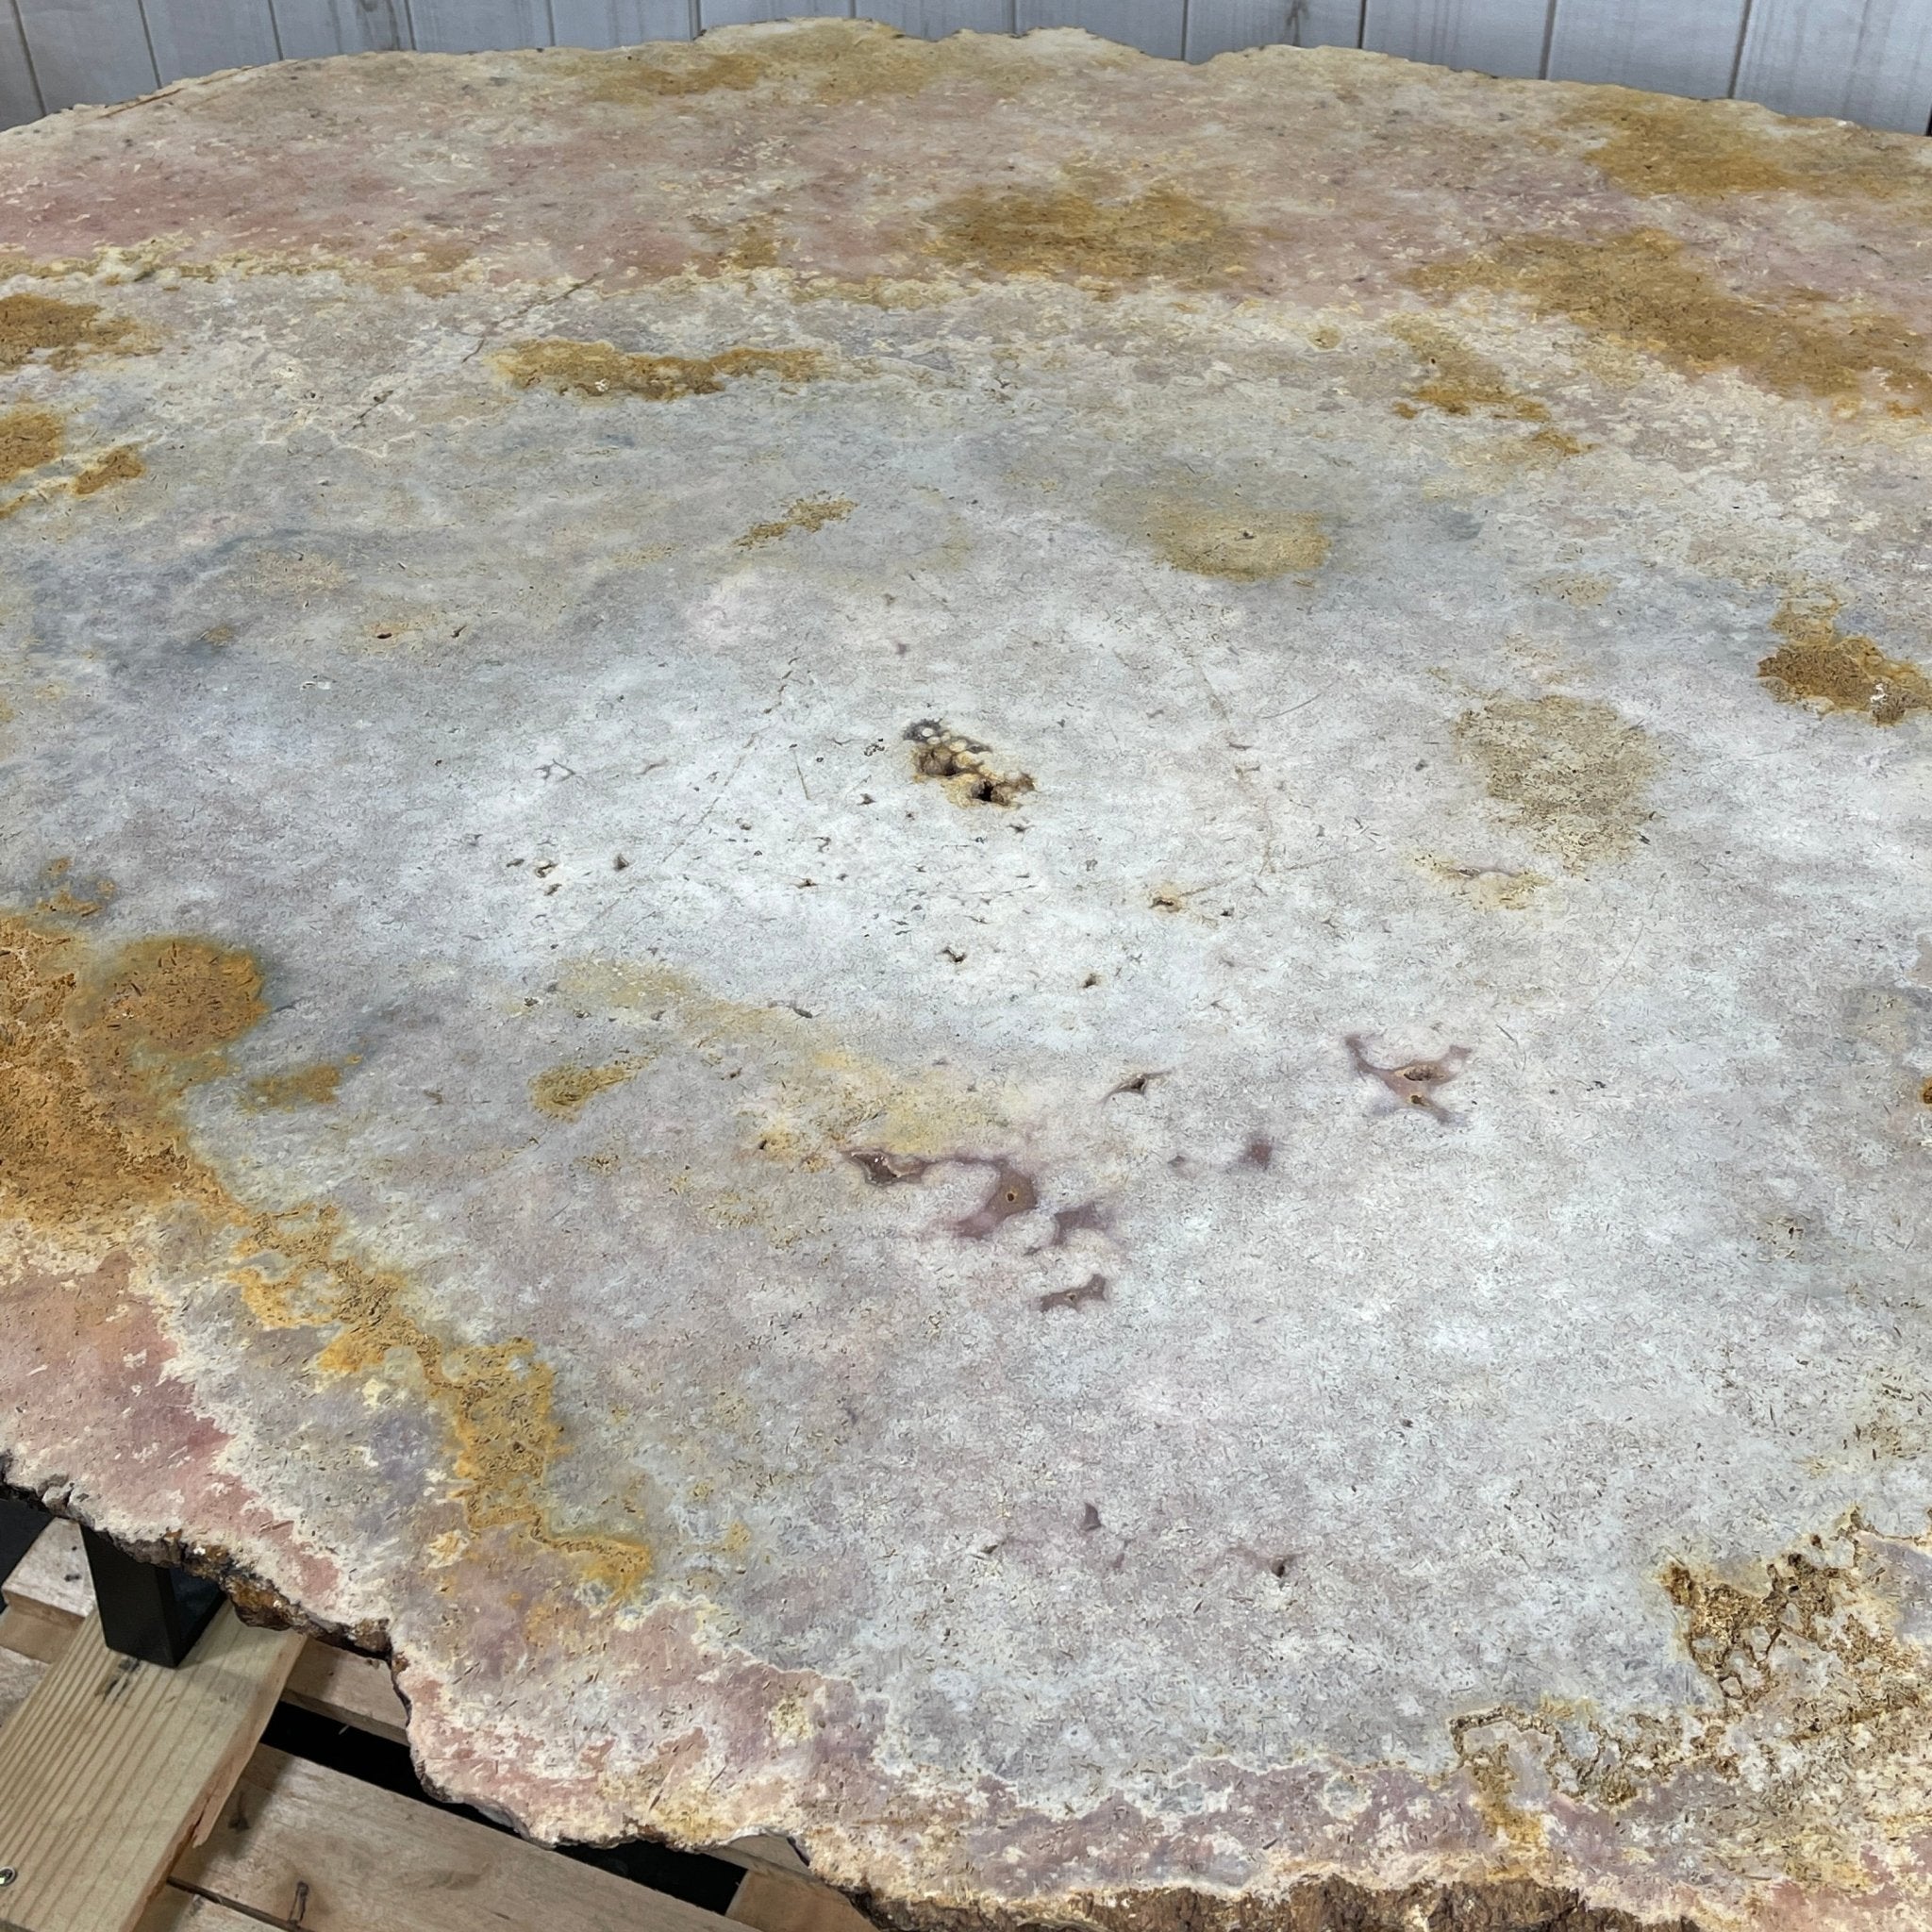 Special Pink Amethyst Dining/Conference Room Table Super Quality, 992.3 lbs & 58.8" long #1380-0001 - Brazil GemsBrazil GemsSpecial Pink Amethyst Dining/Conference Room Table Super Quality, 992.3 lbs & 58.8" long #1380-0001Tables: Dining1380-0001